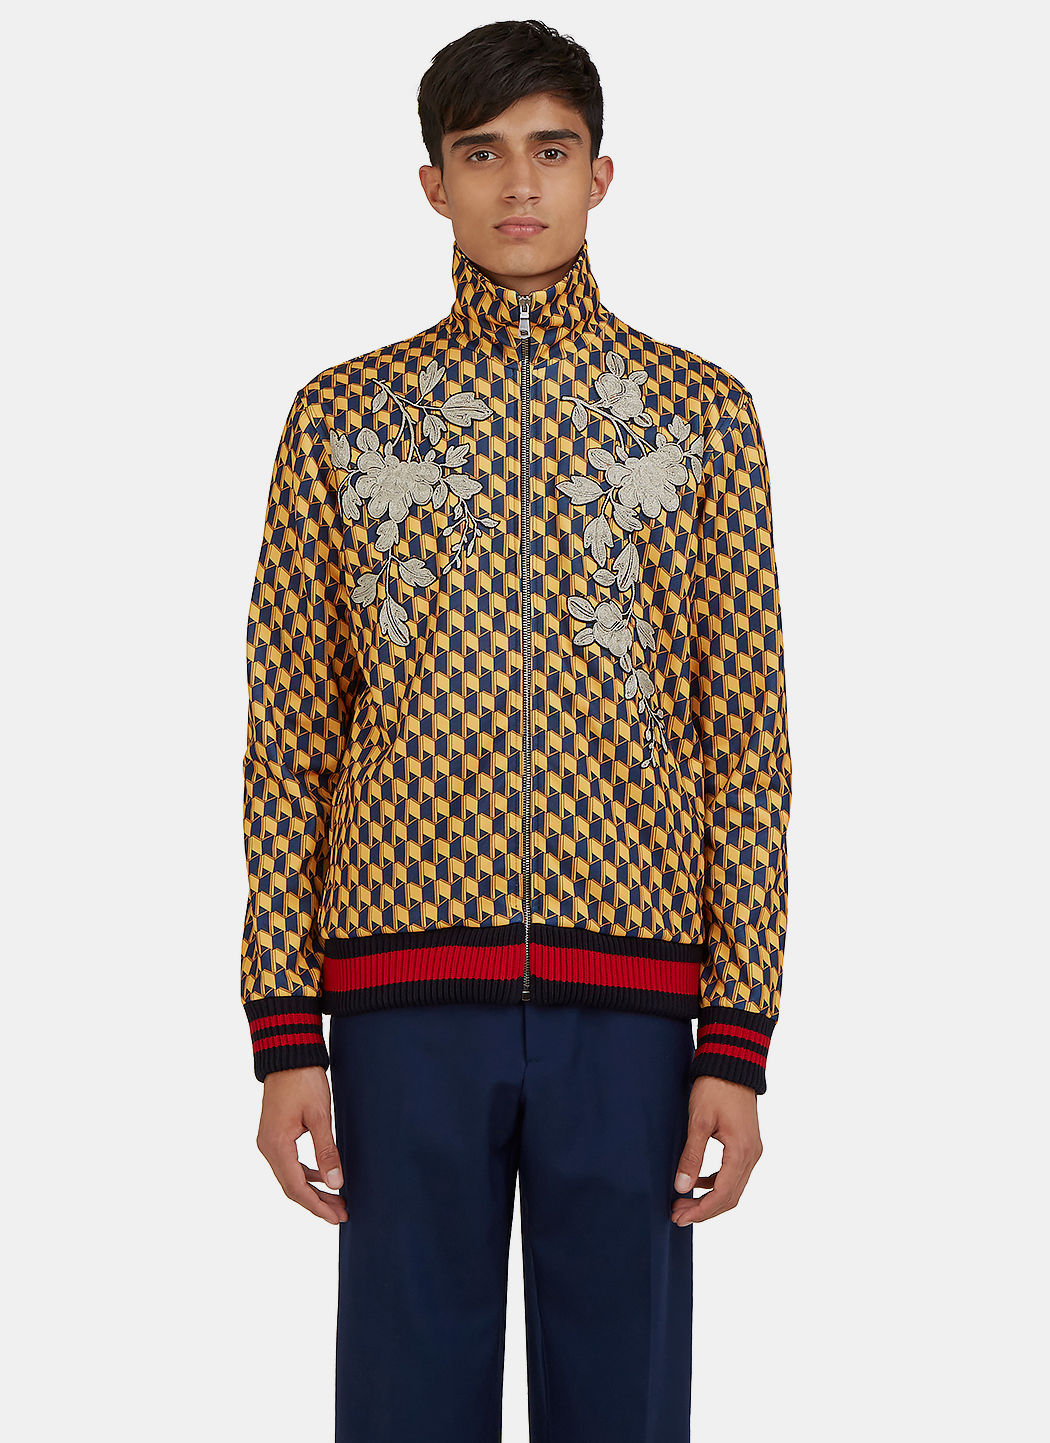 Gucci Men's Embroidered Geometric Print Teddy Bomber Jacket In Yellow ...